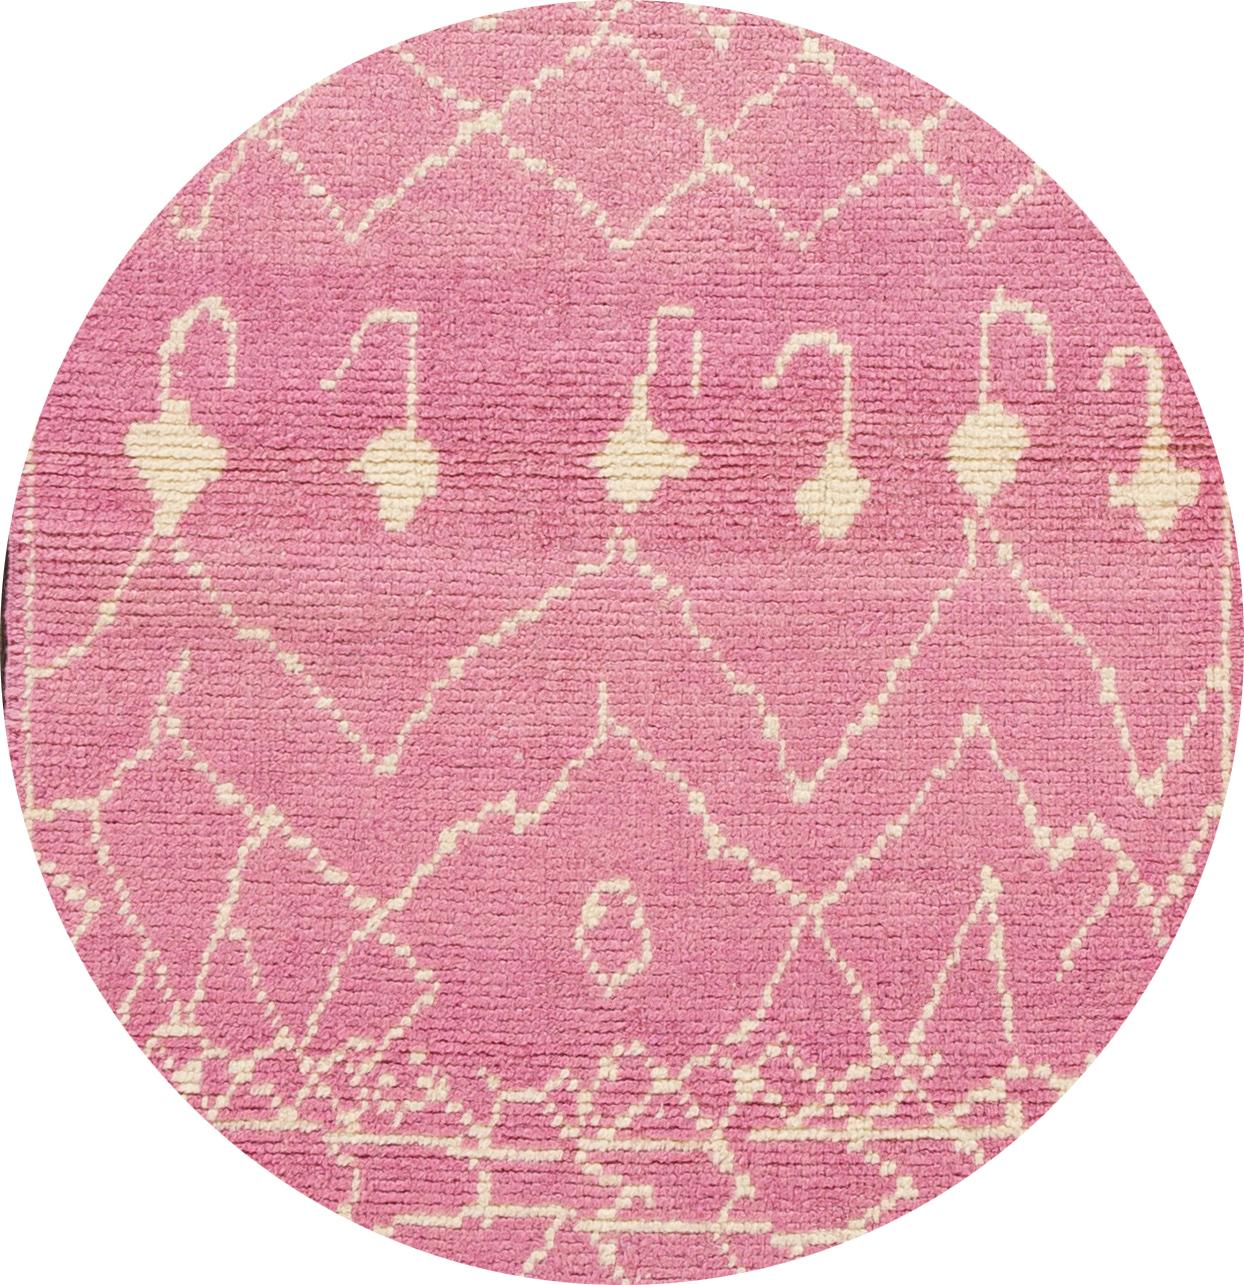 Beautiful contemporary Moroccan style runner rug, hand knotted wool with a pink field, ivory accents in a gorgeous all-over tribal design.
This rug measures: 3'1